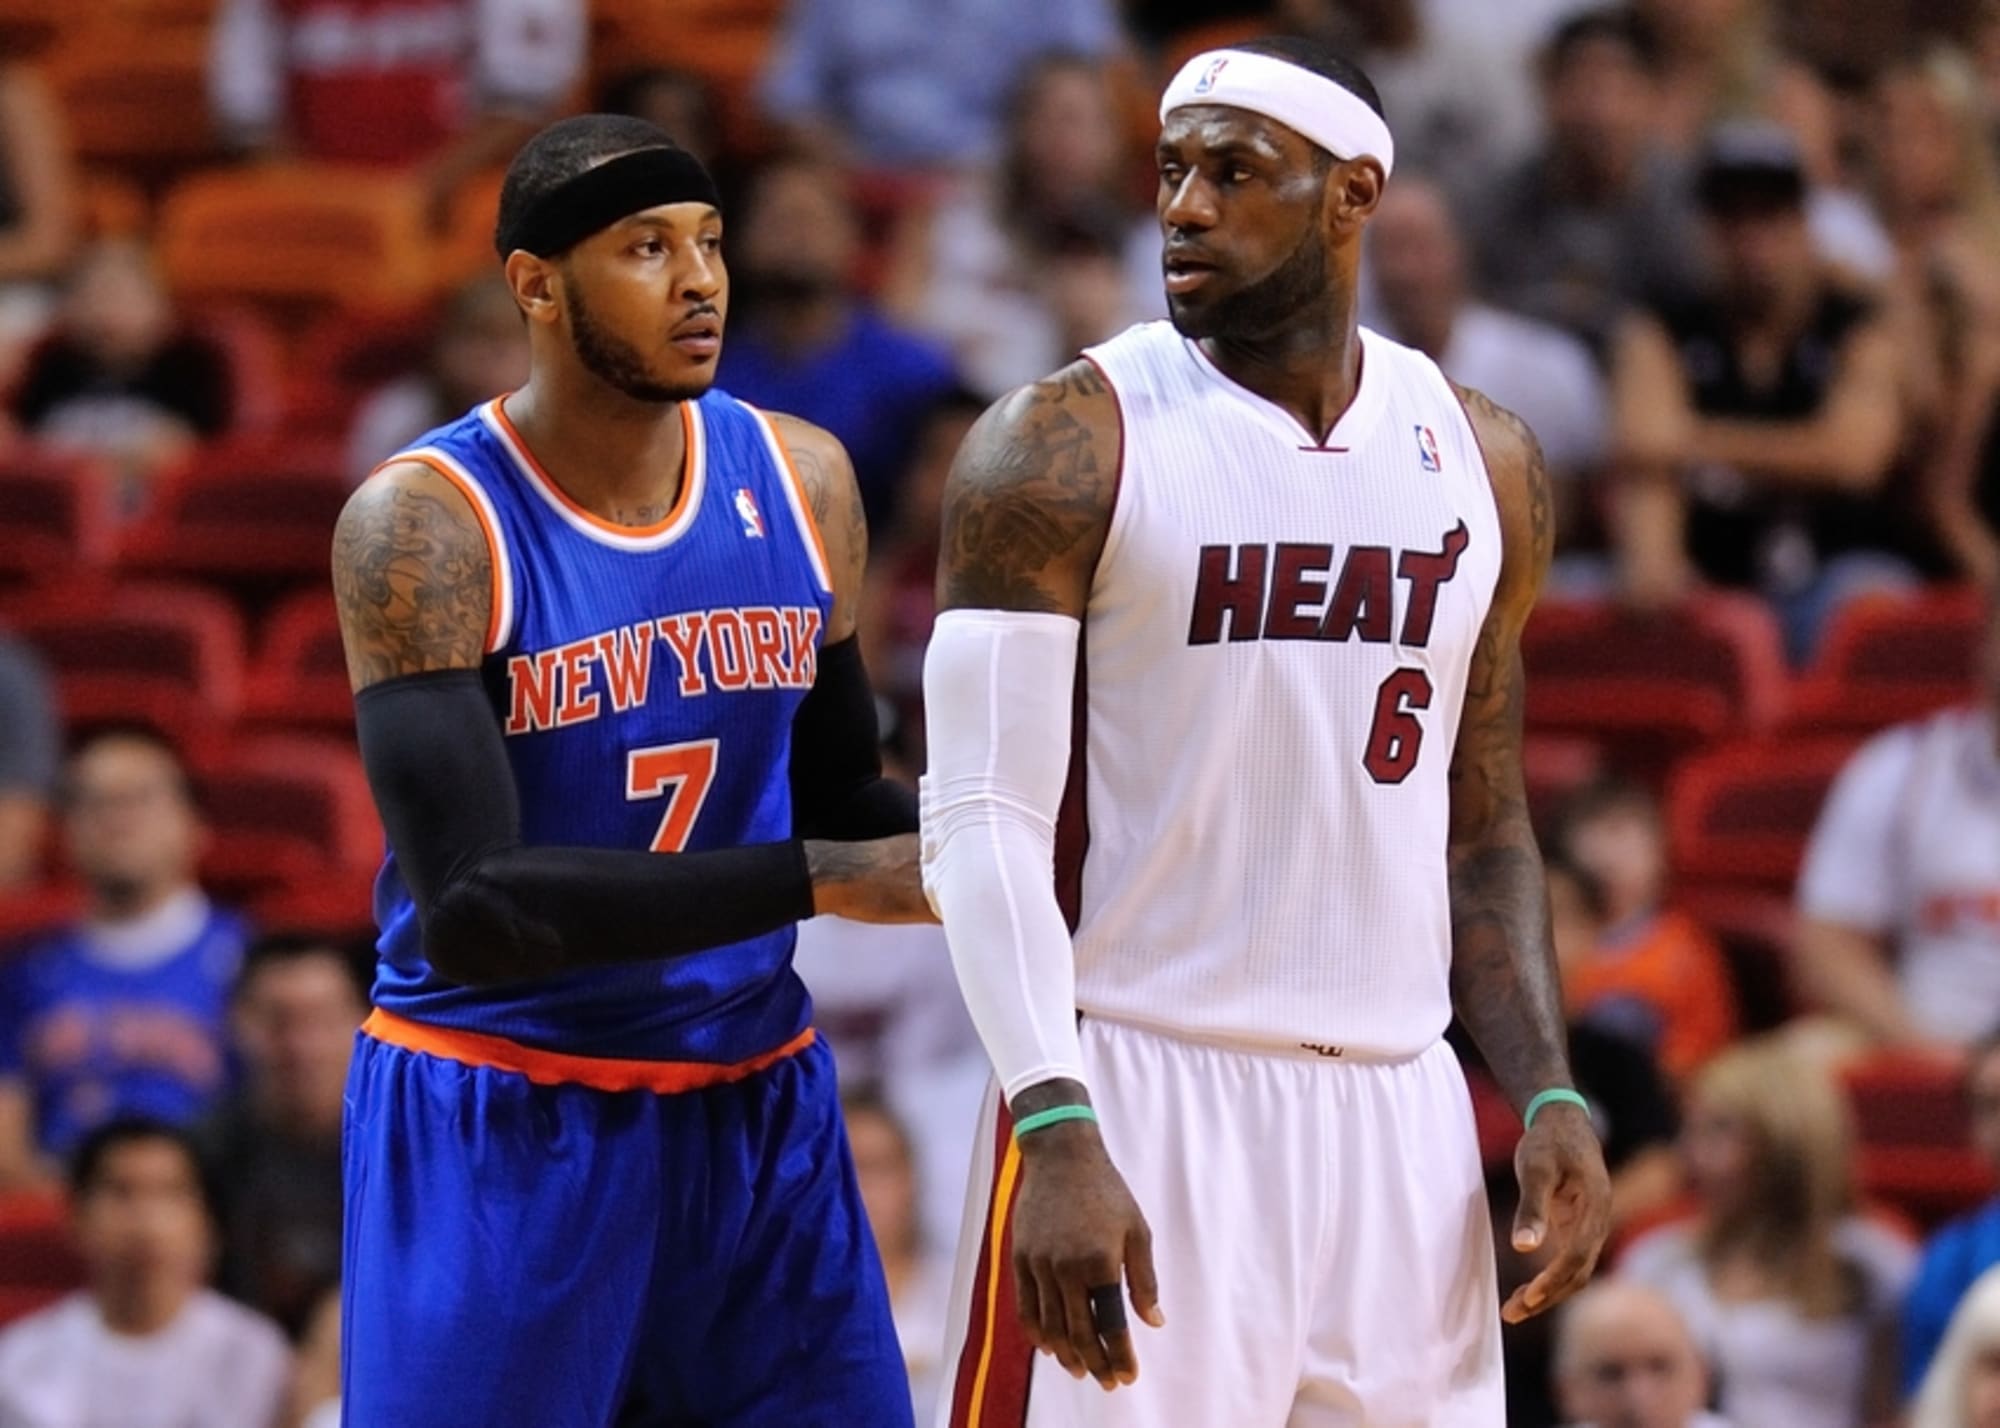 NBA: A LeBron James, Carmelo Anthony Pairing Already A Done Deal?